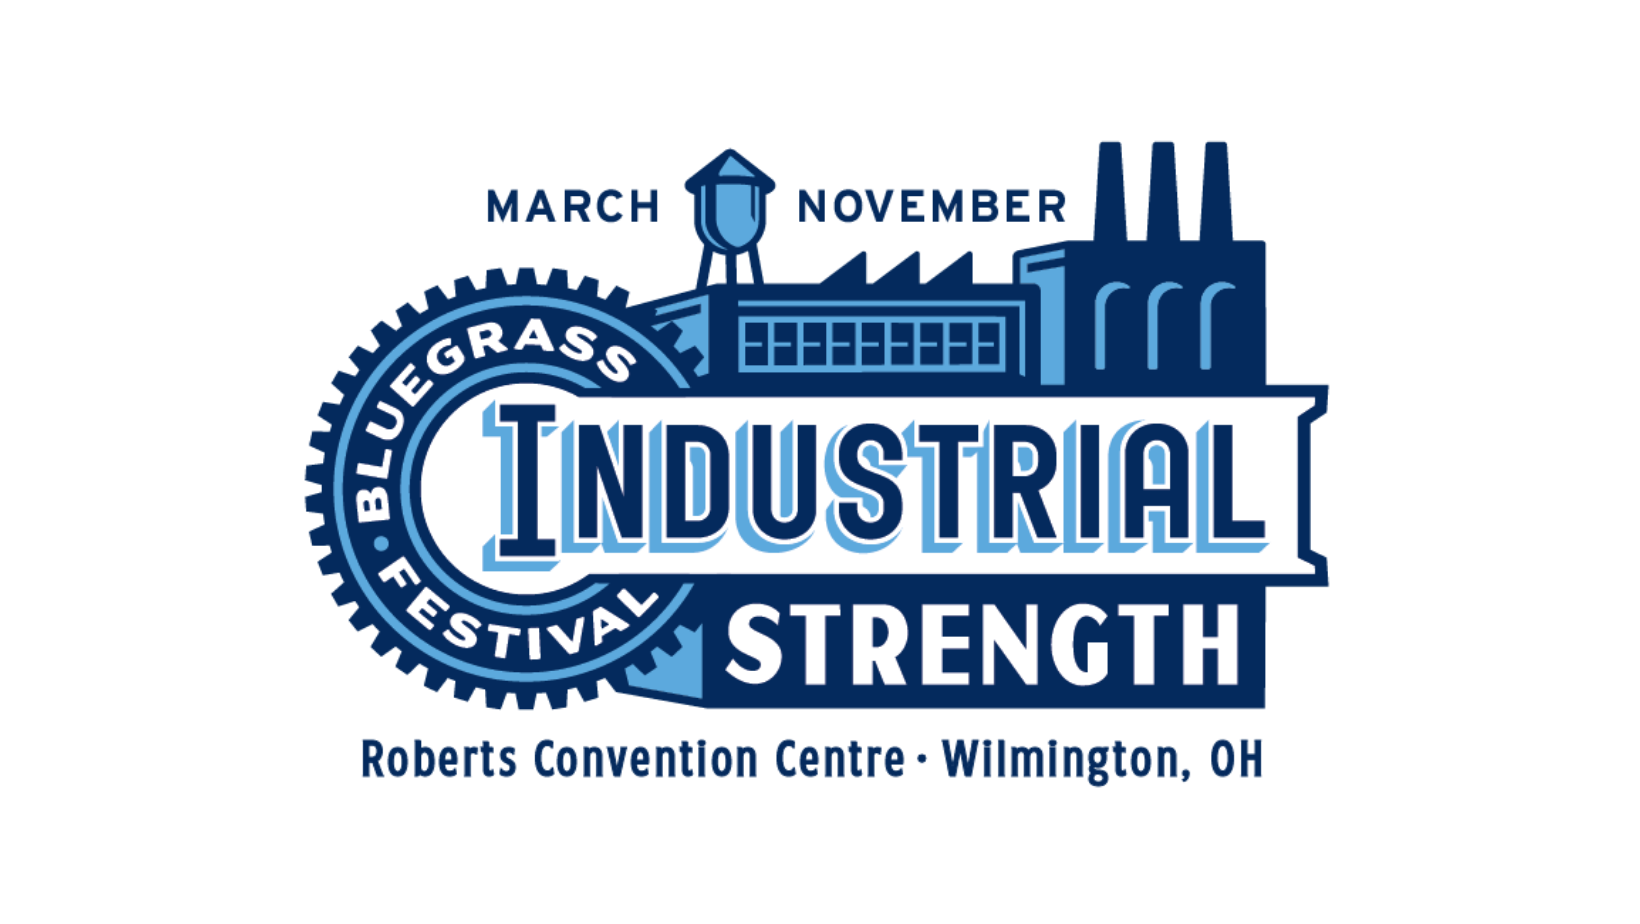 Industrial strength Roberts convention Centre logo